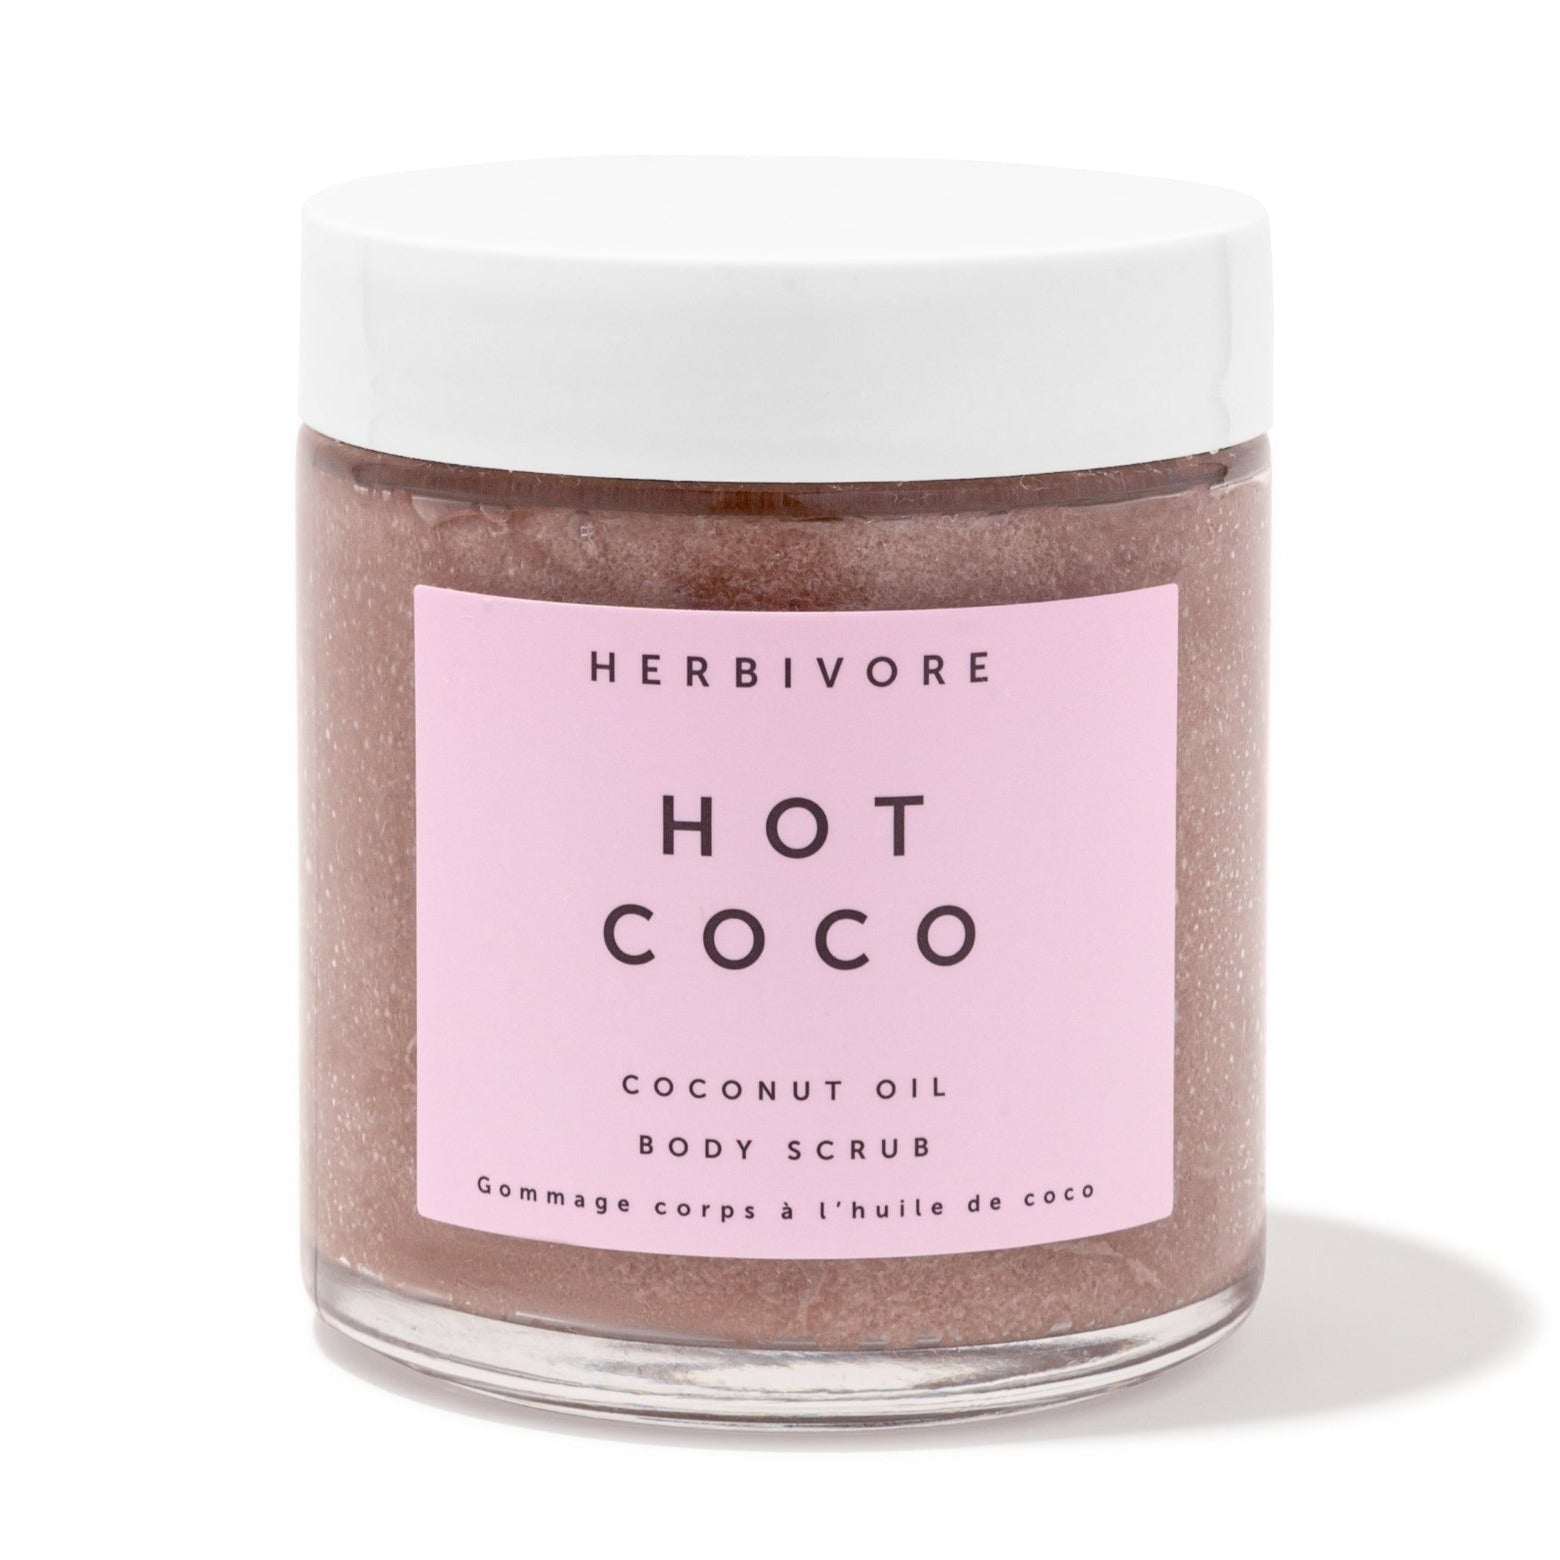 HOT COCO Scrub by Herbivore on a white background